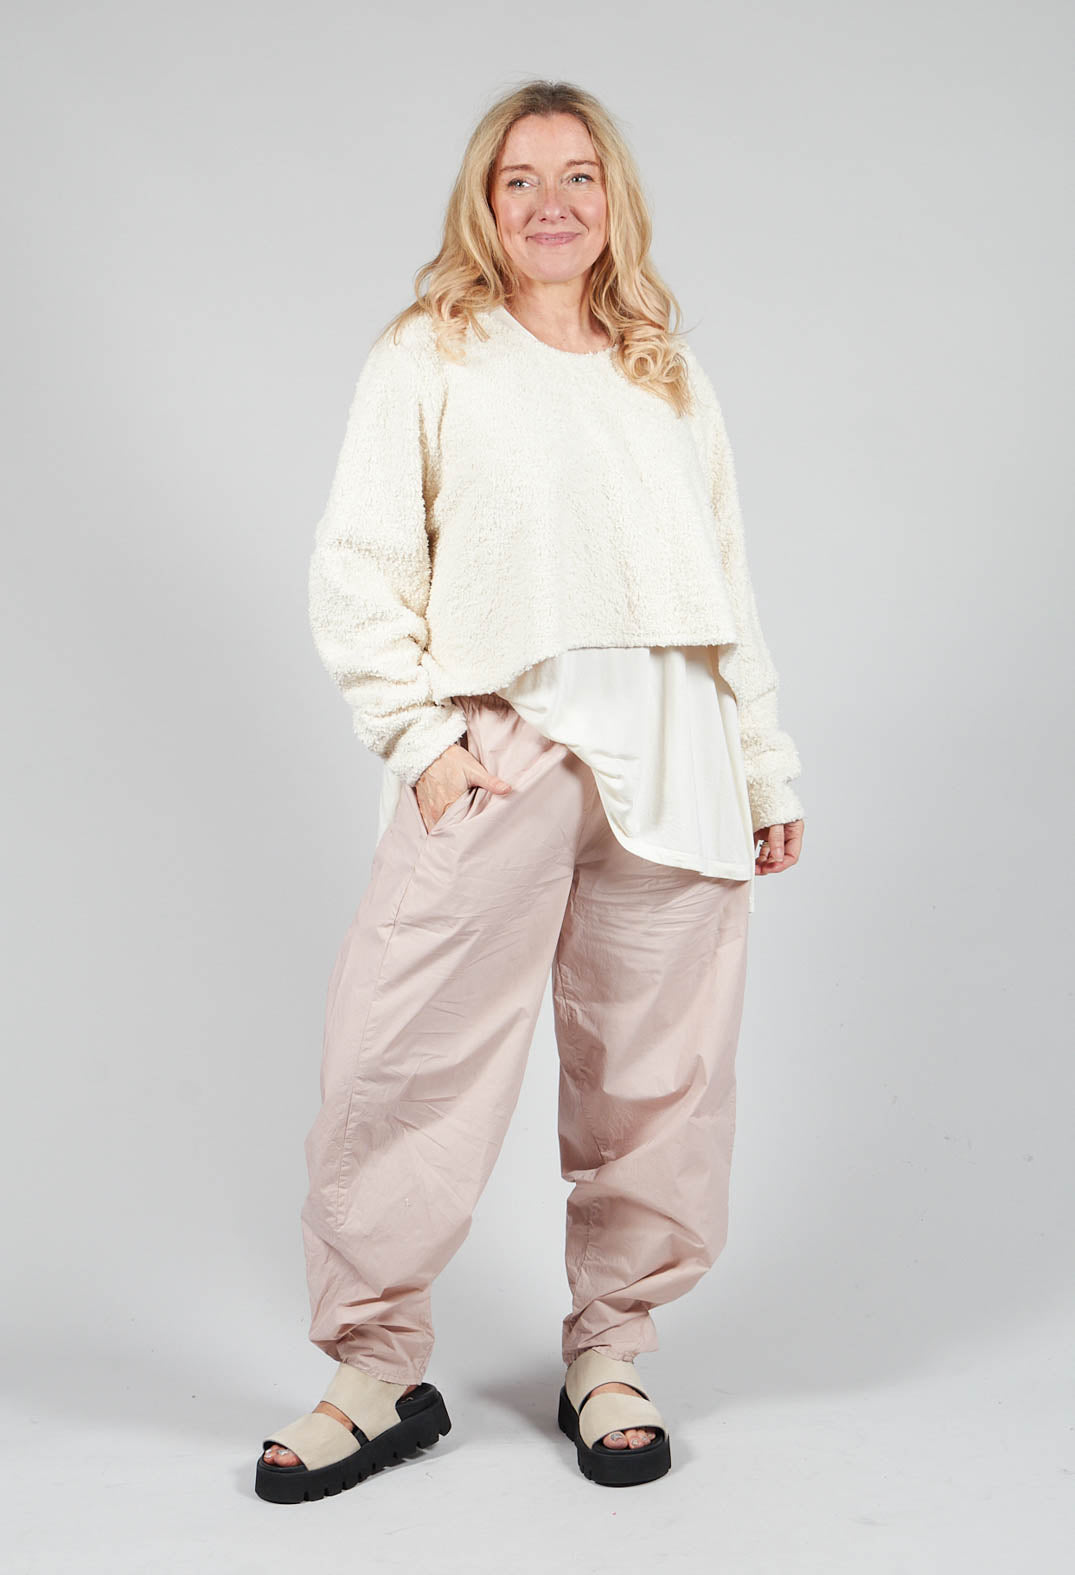 Botanicals Trousers in Reife